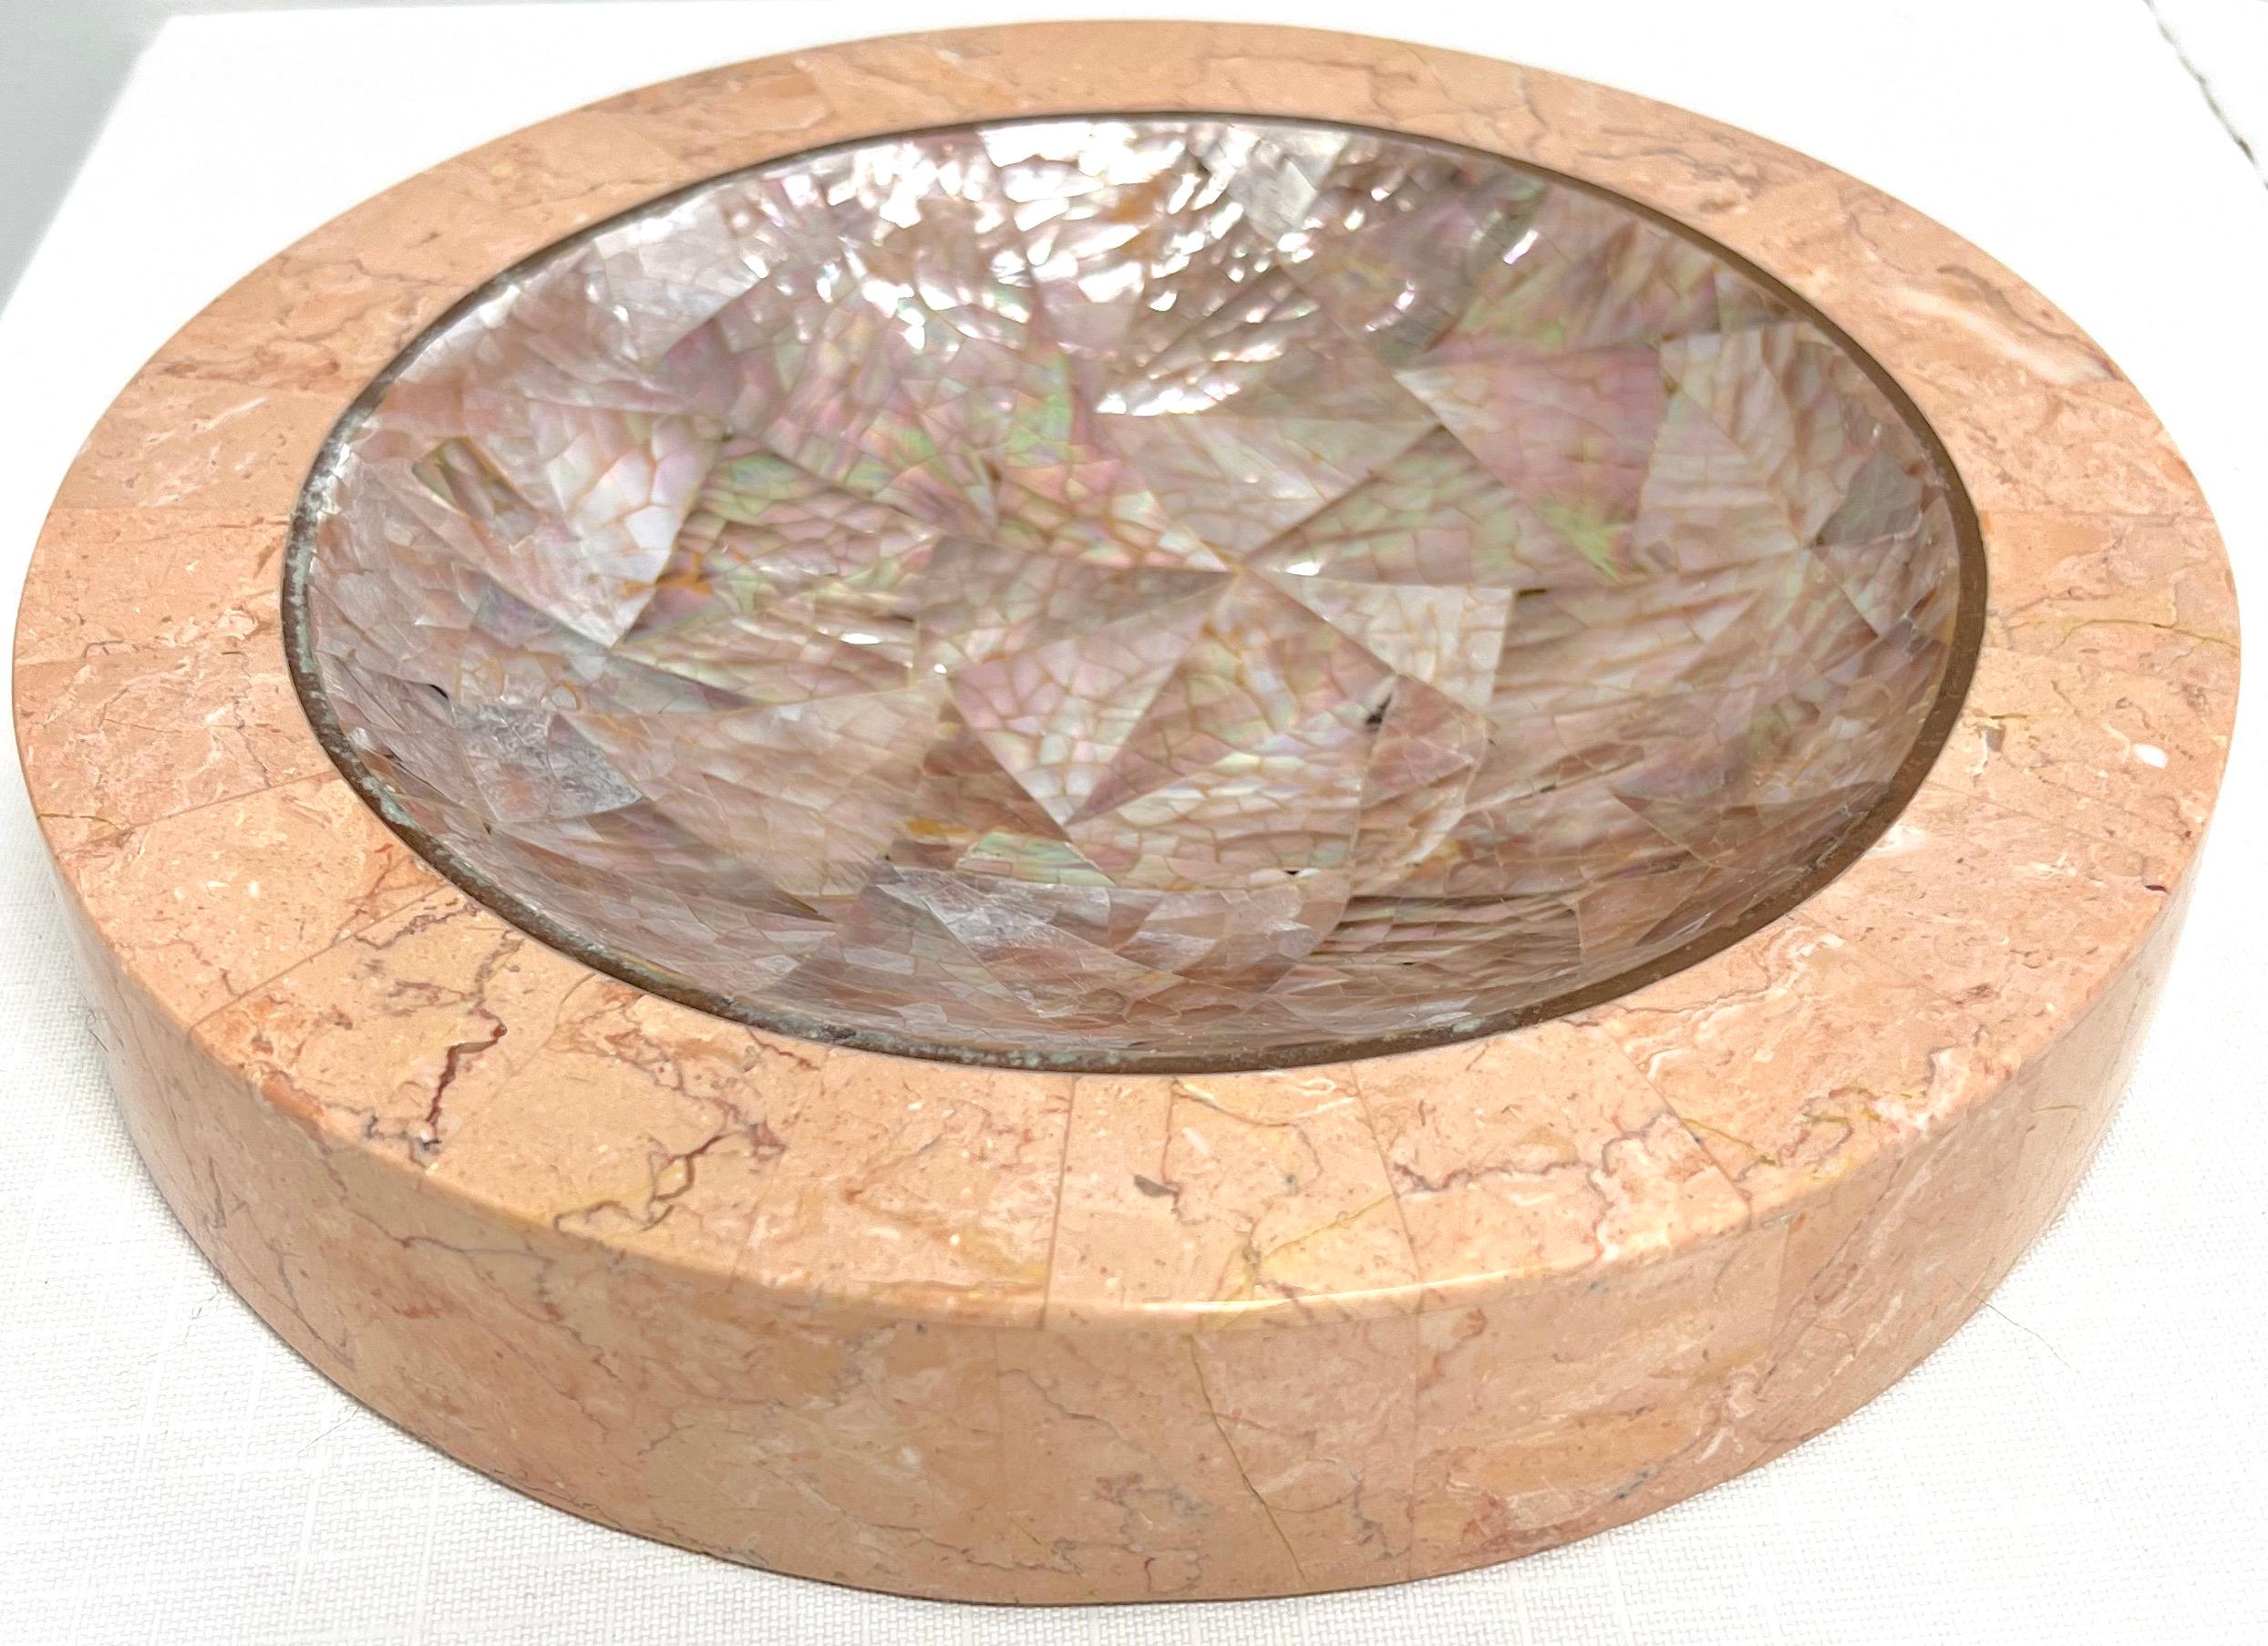 A decorative catchall bowl in tessellated stone by Dara, a division of Kinder-Harris. Base is shades of pink colored tessellated stone tiles in a round shade, recessed interior is shades of amethyst colored patterned tessellated stone tiles, and a